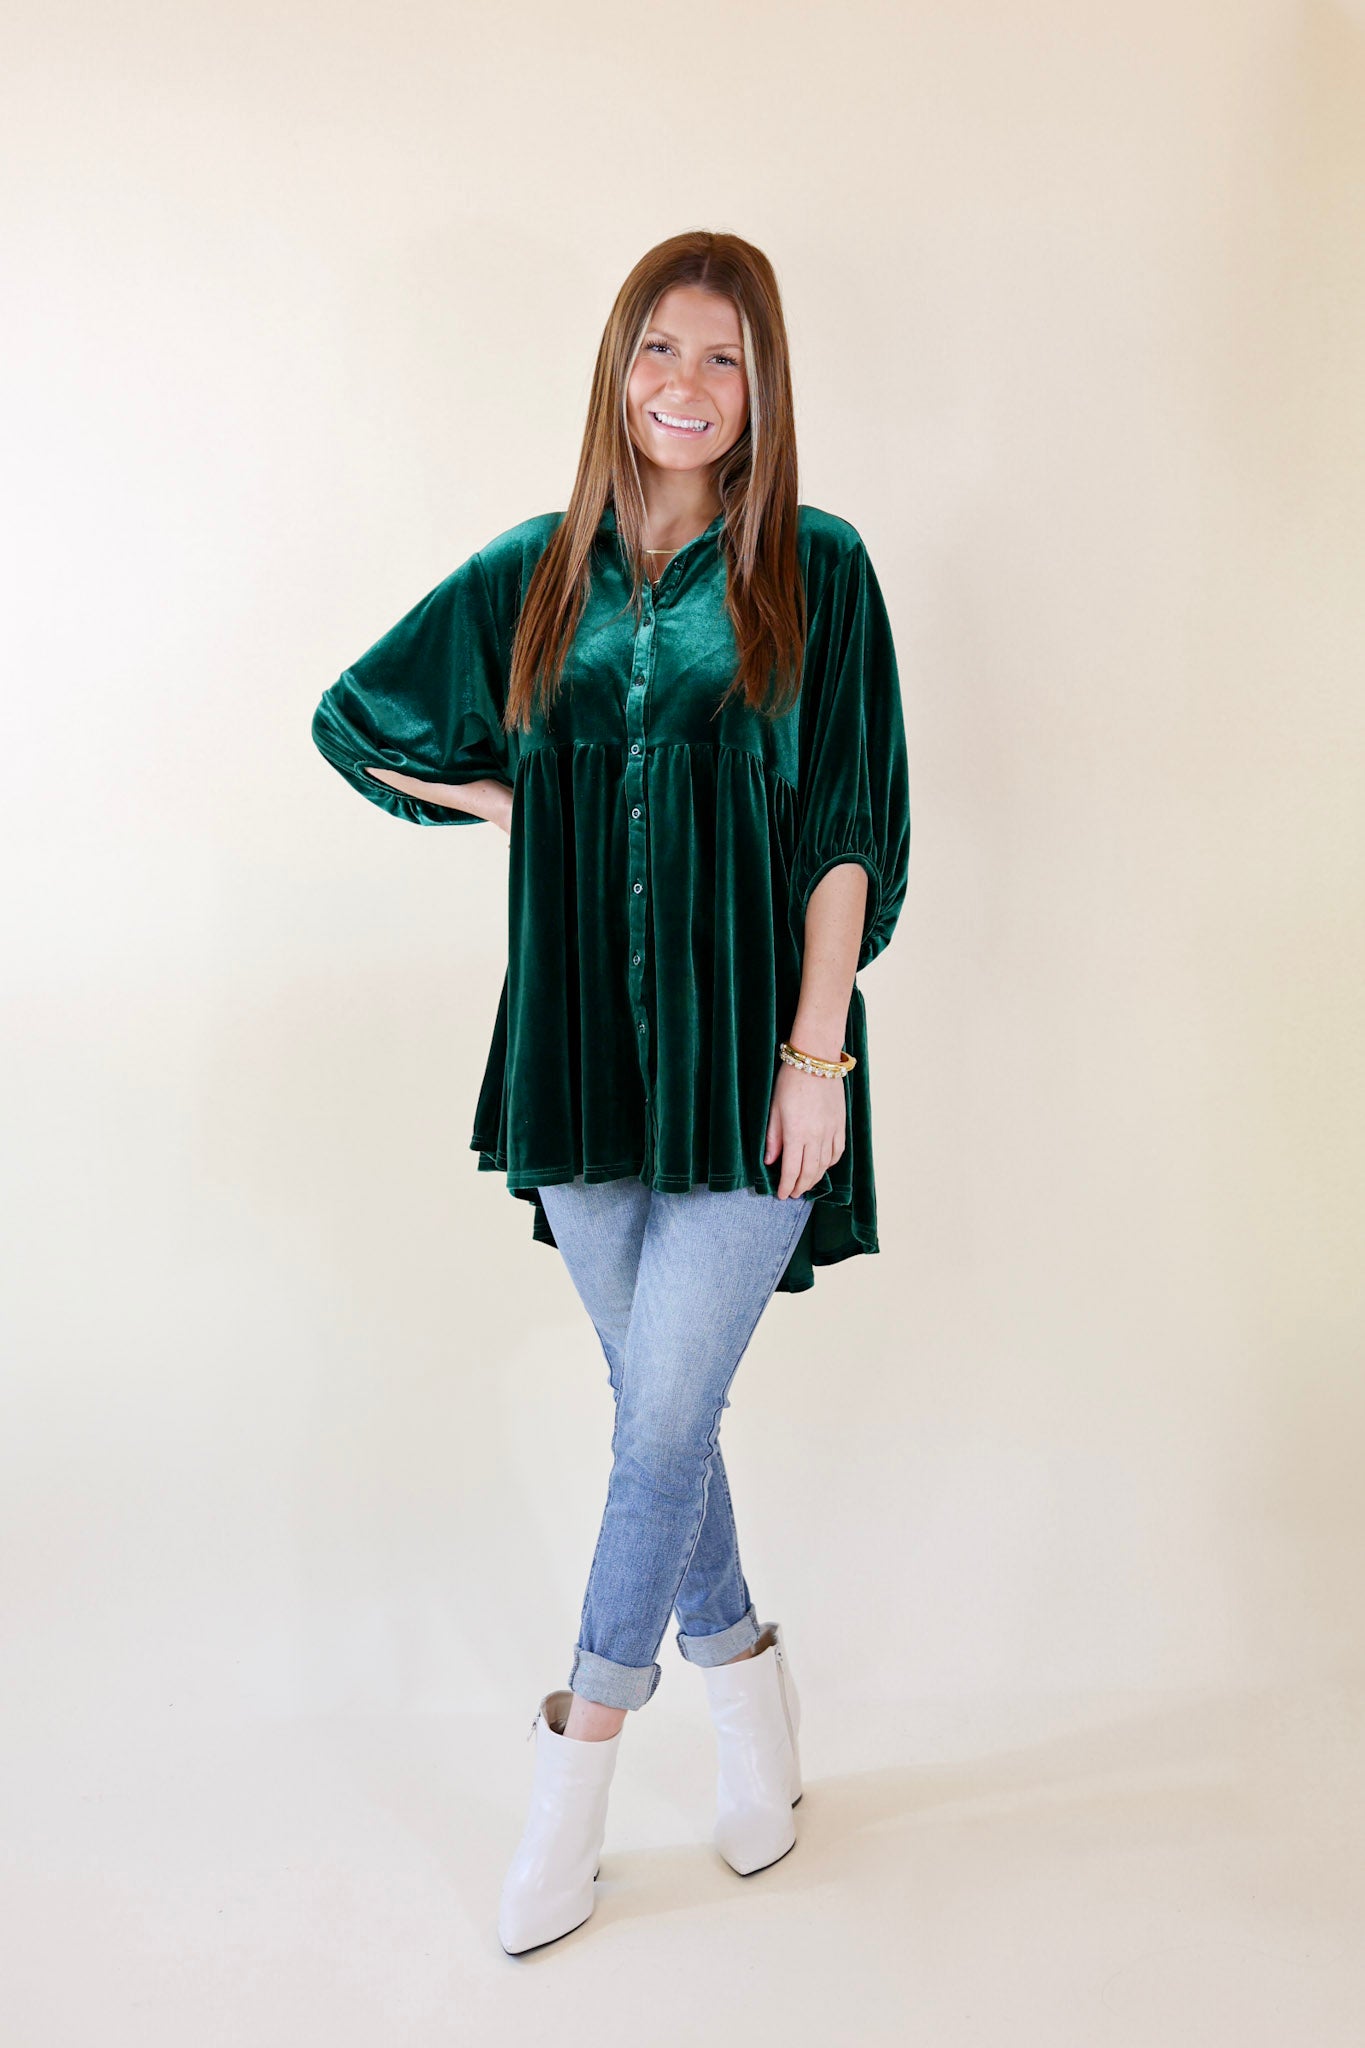 Love Link Button Up Velvet Half Sleeve Babydoll Tunic Top in Emerald Green - Giddy Up Glamour Boutique